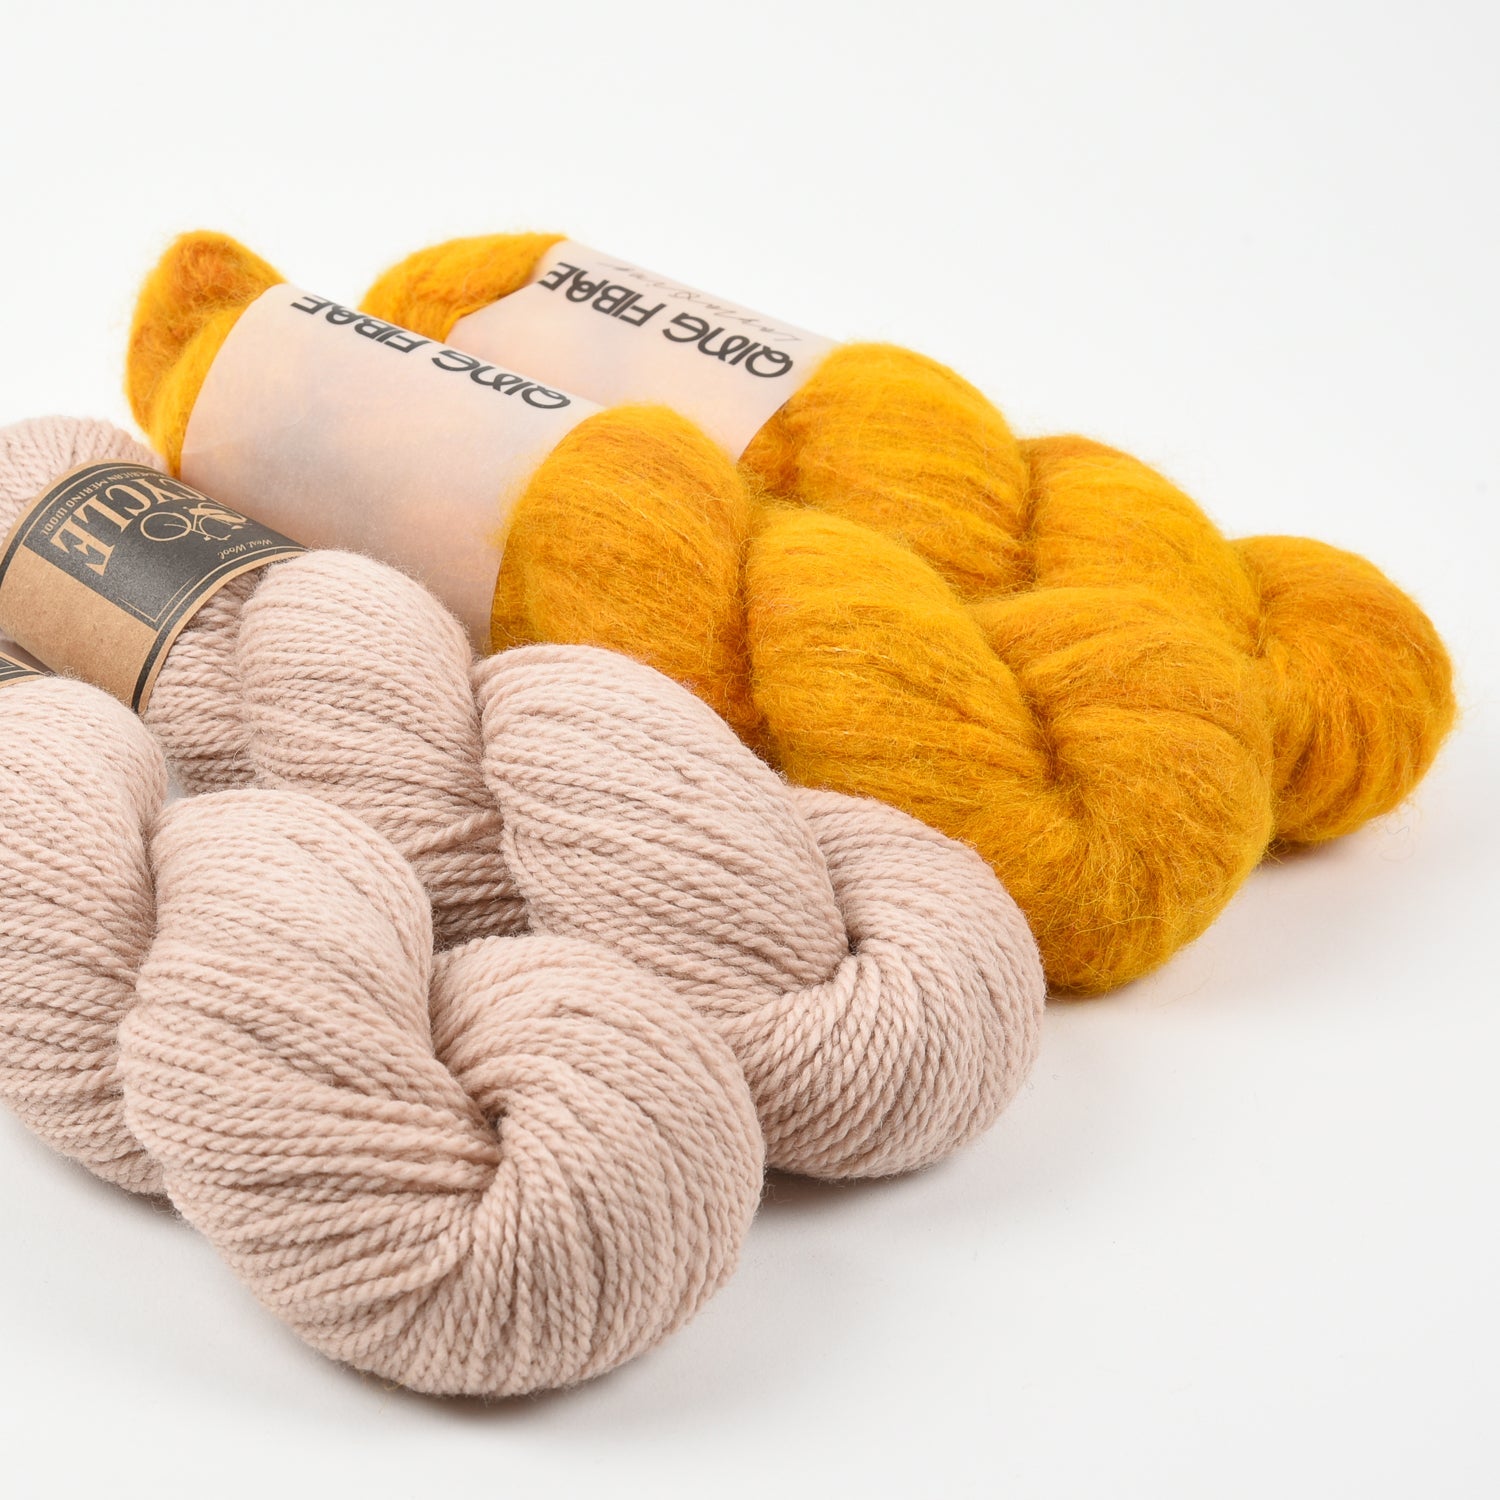 WESTKNITS KIT - MELTED BISCUITS